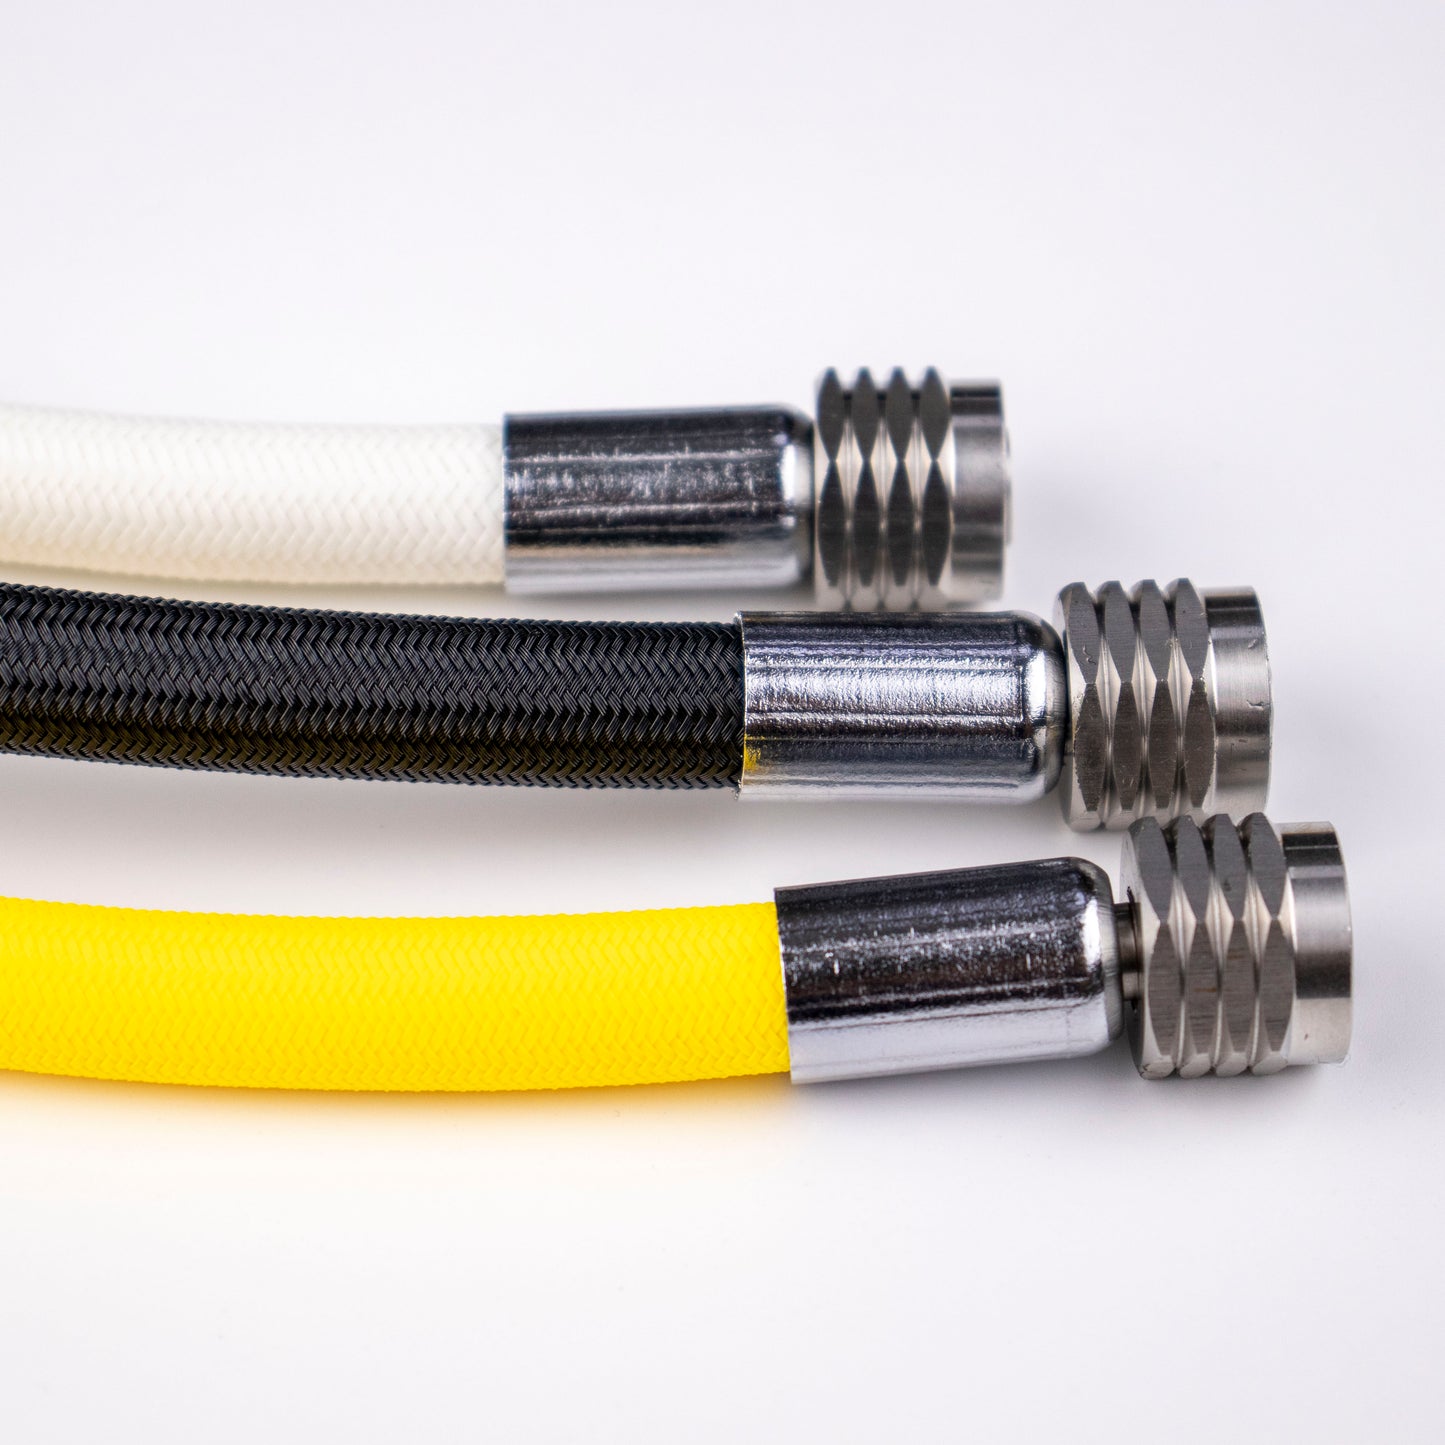 L.P. (Low Pressure) Braided Hose with Stainless Steel Fittings: Flame-Resistant, Kink-Free & Suitable for Recreational Scuba, Marine, Fire & Chemical Industries